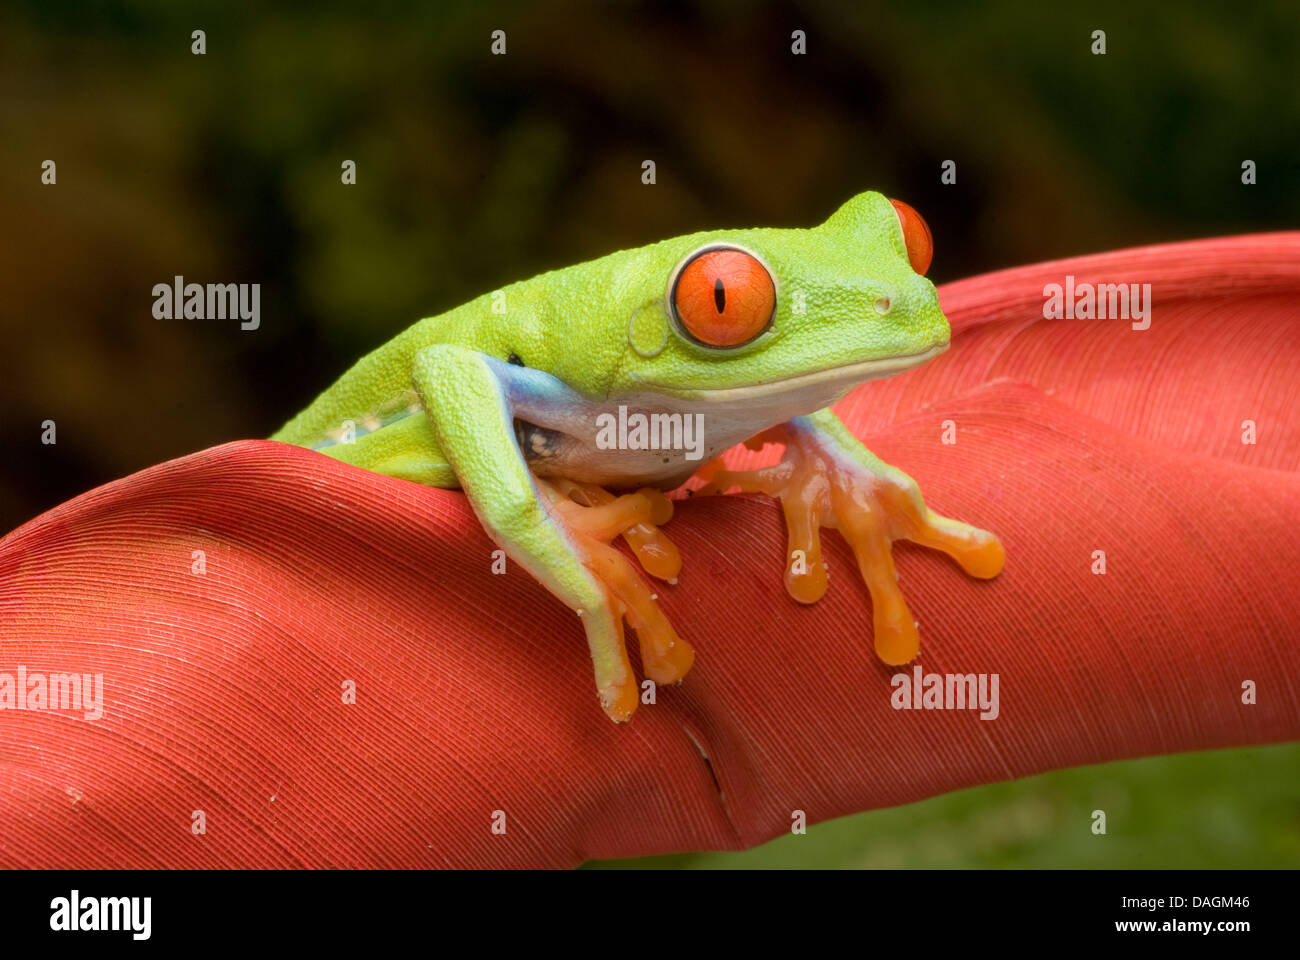 red-eyed treefrog, redeyed treefrog, redeye treefrog, red eye treefrog, red eyed frog (Agalychnis callidryas), on a rolled up leaf Stock Photo